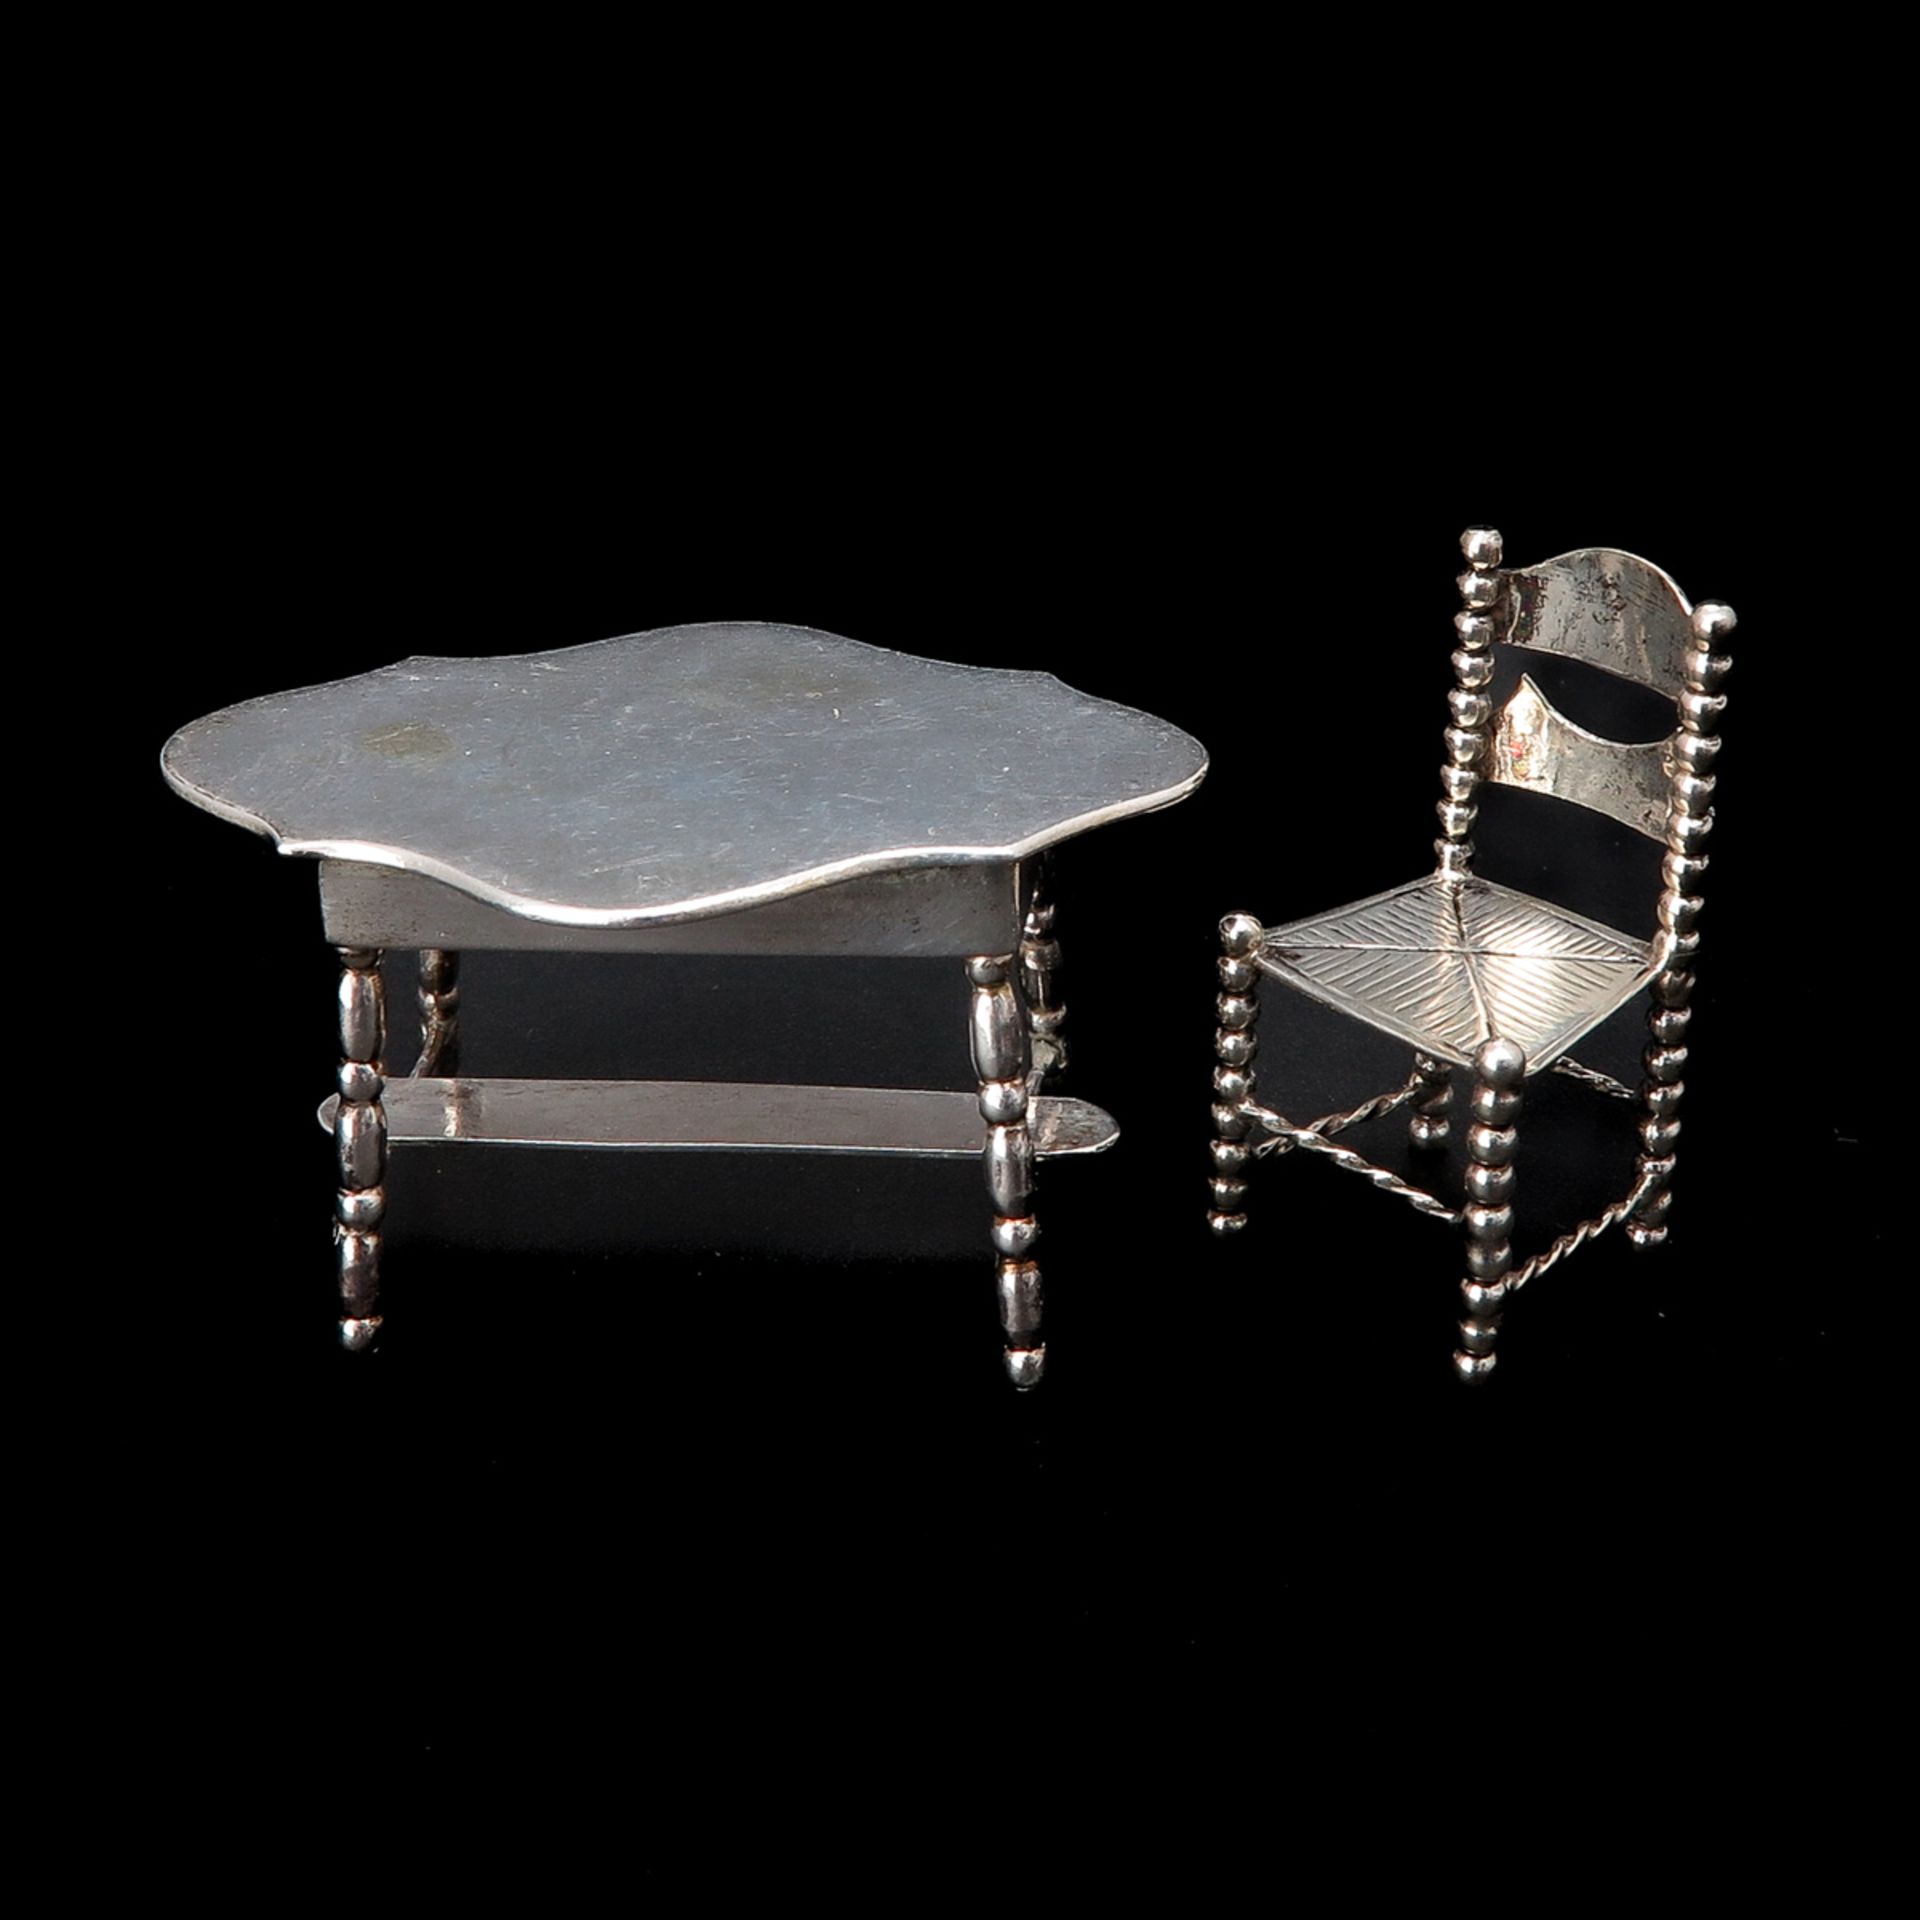 A Miniature Silver Table and Chair